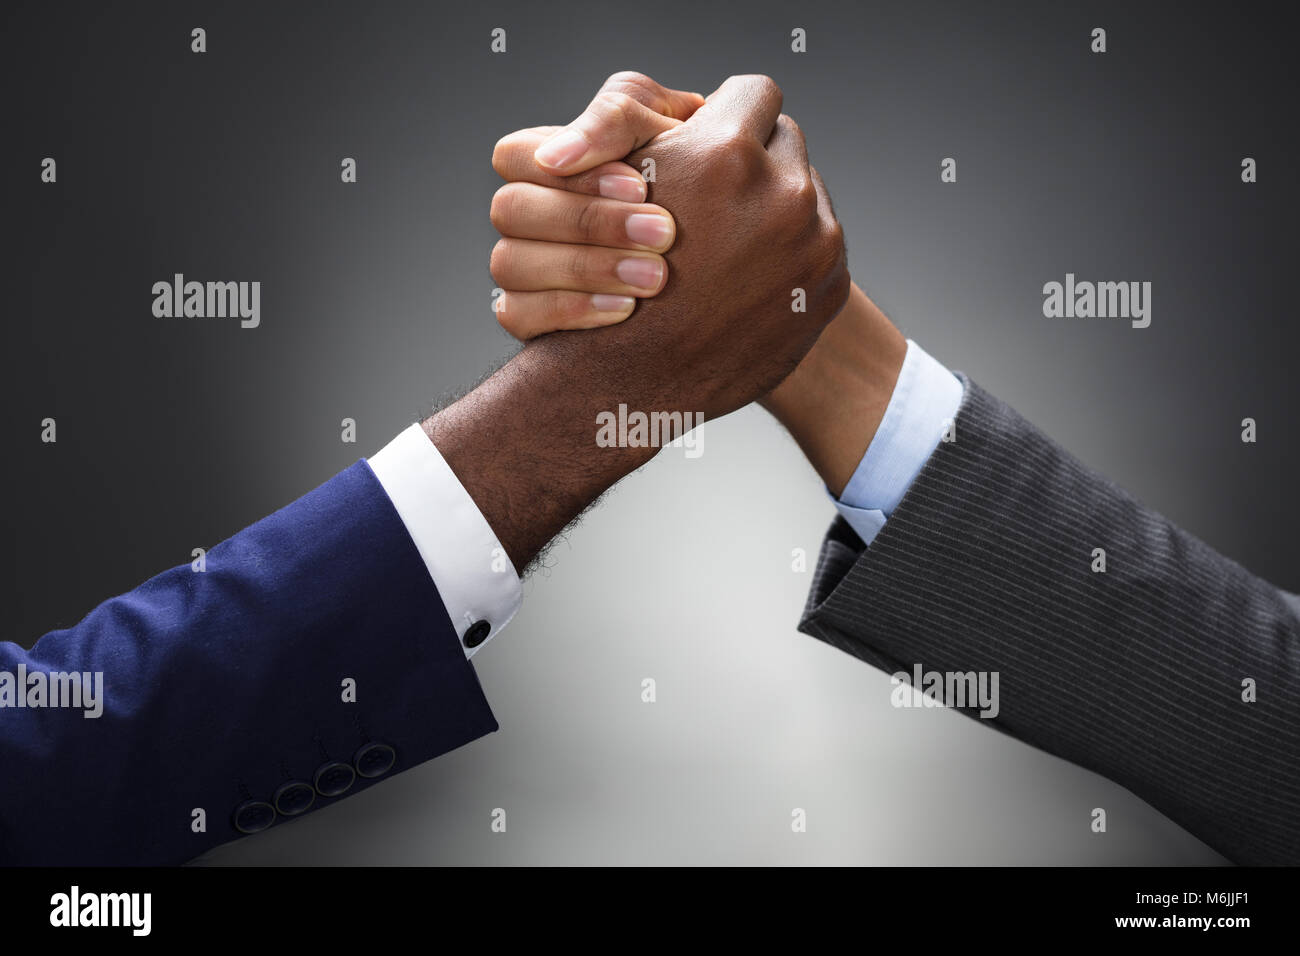 Close-up Of Two Businessman Competing In Arm Wrestling On Gray Background Stock Photo